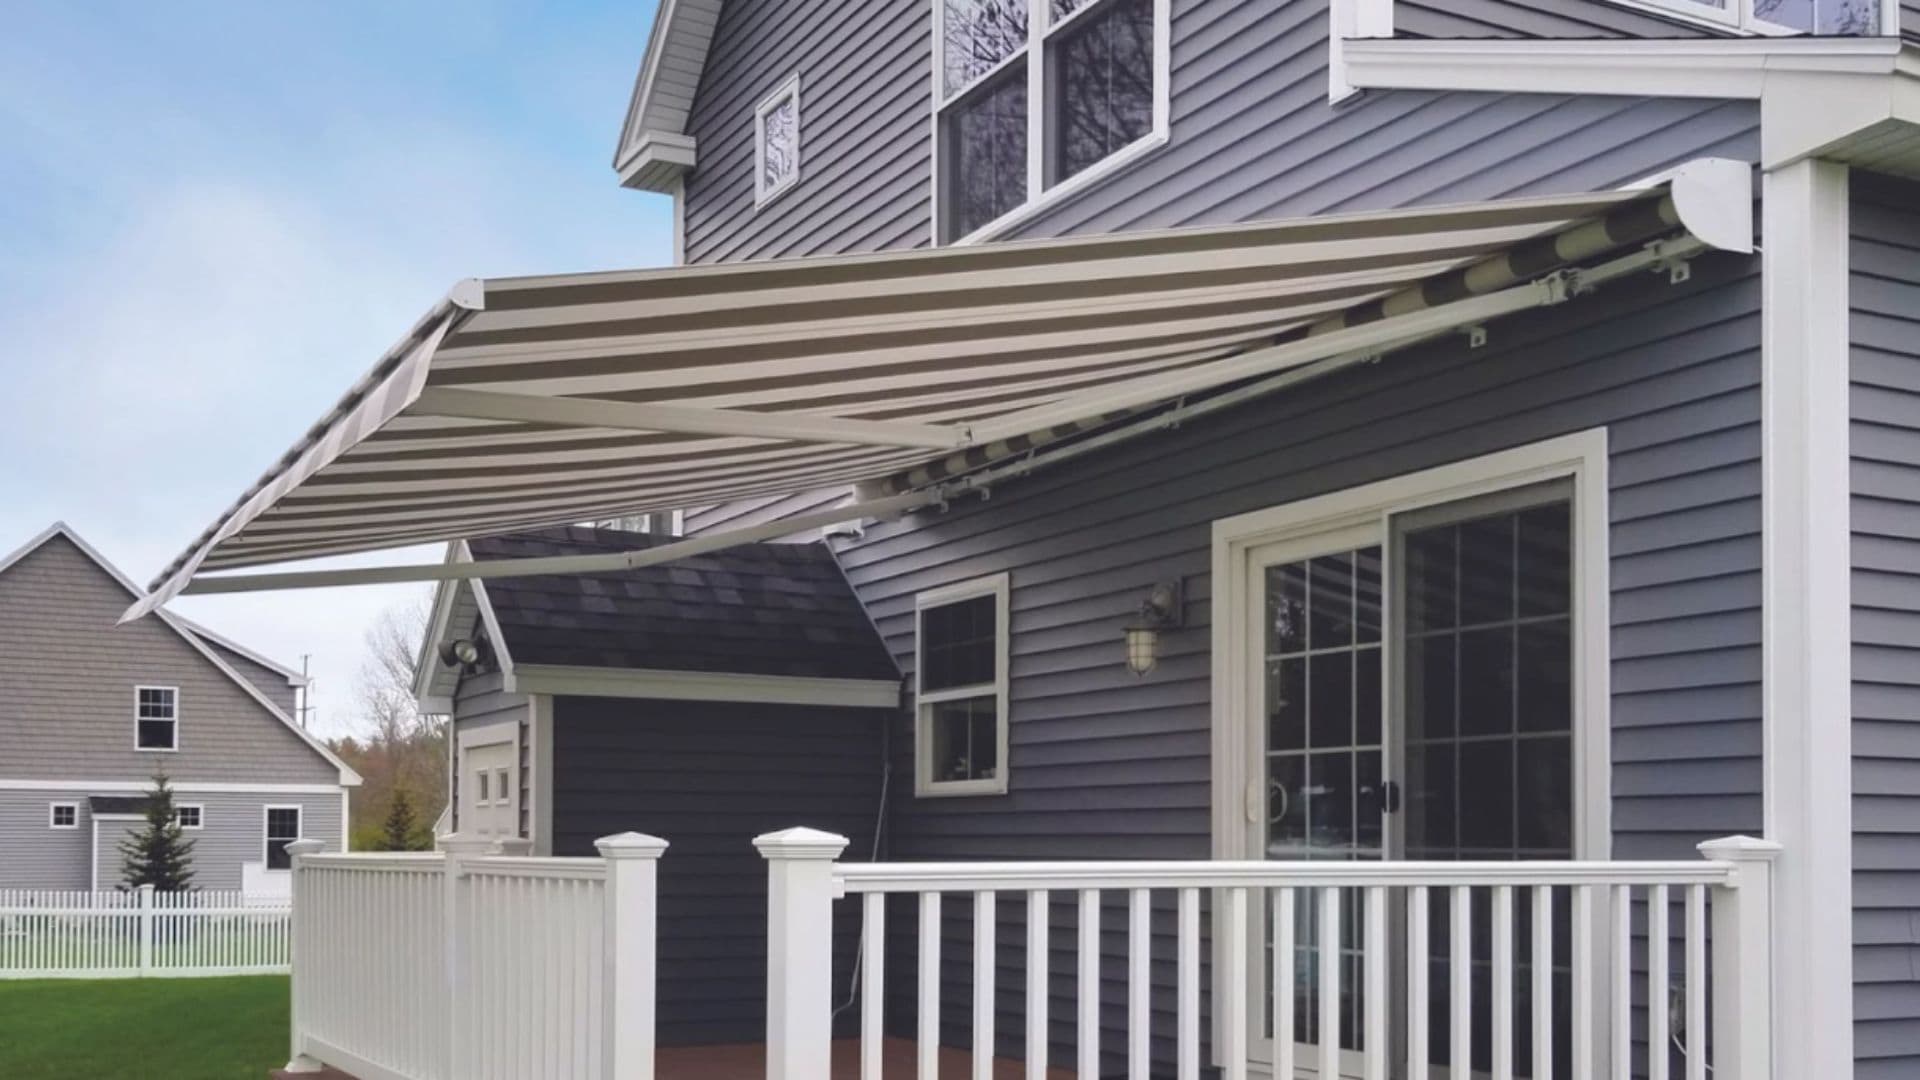 Why Are Retractable Awnings So Expensive?